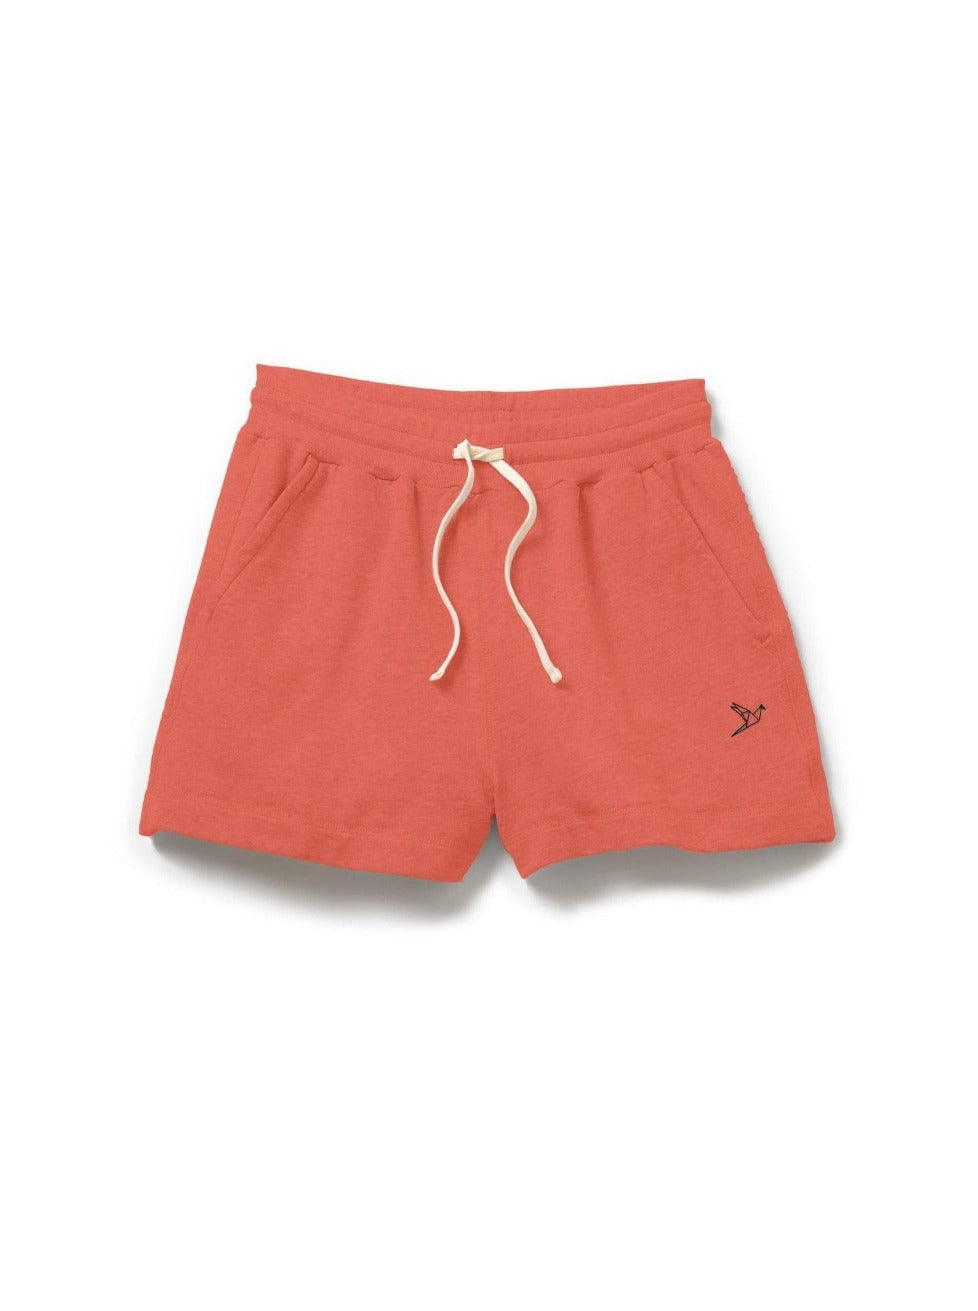 Women's Sweat shorts - Coral - ORILABO Project